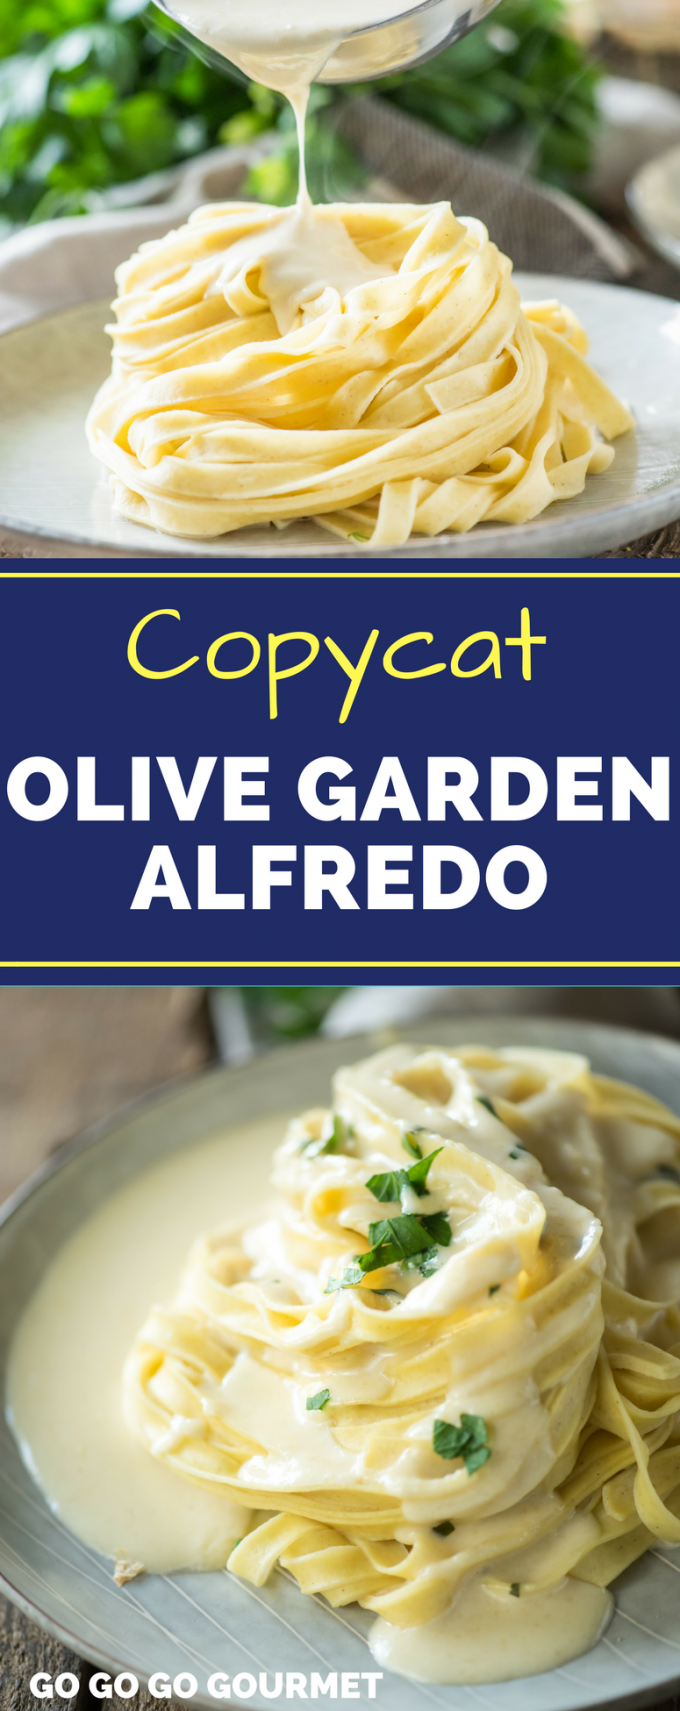 This Homemade Copycat Olive Garden Alfredo Sauce is a fast and easy dinner, and even better than the original! This alfredo sauce recipe is made with cream cheese for an extra creamy result. #gogogogourmet #alfredo #copycatolivegardenalfredo #alfredosauce #pasta #olivegarden #copycat #dinner #recipes via @gogogogourmet